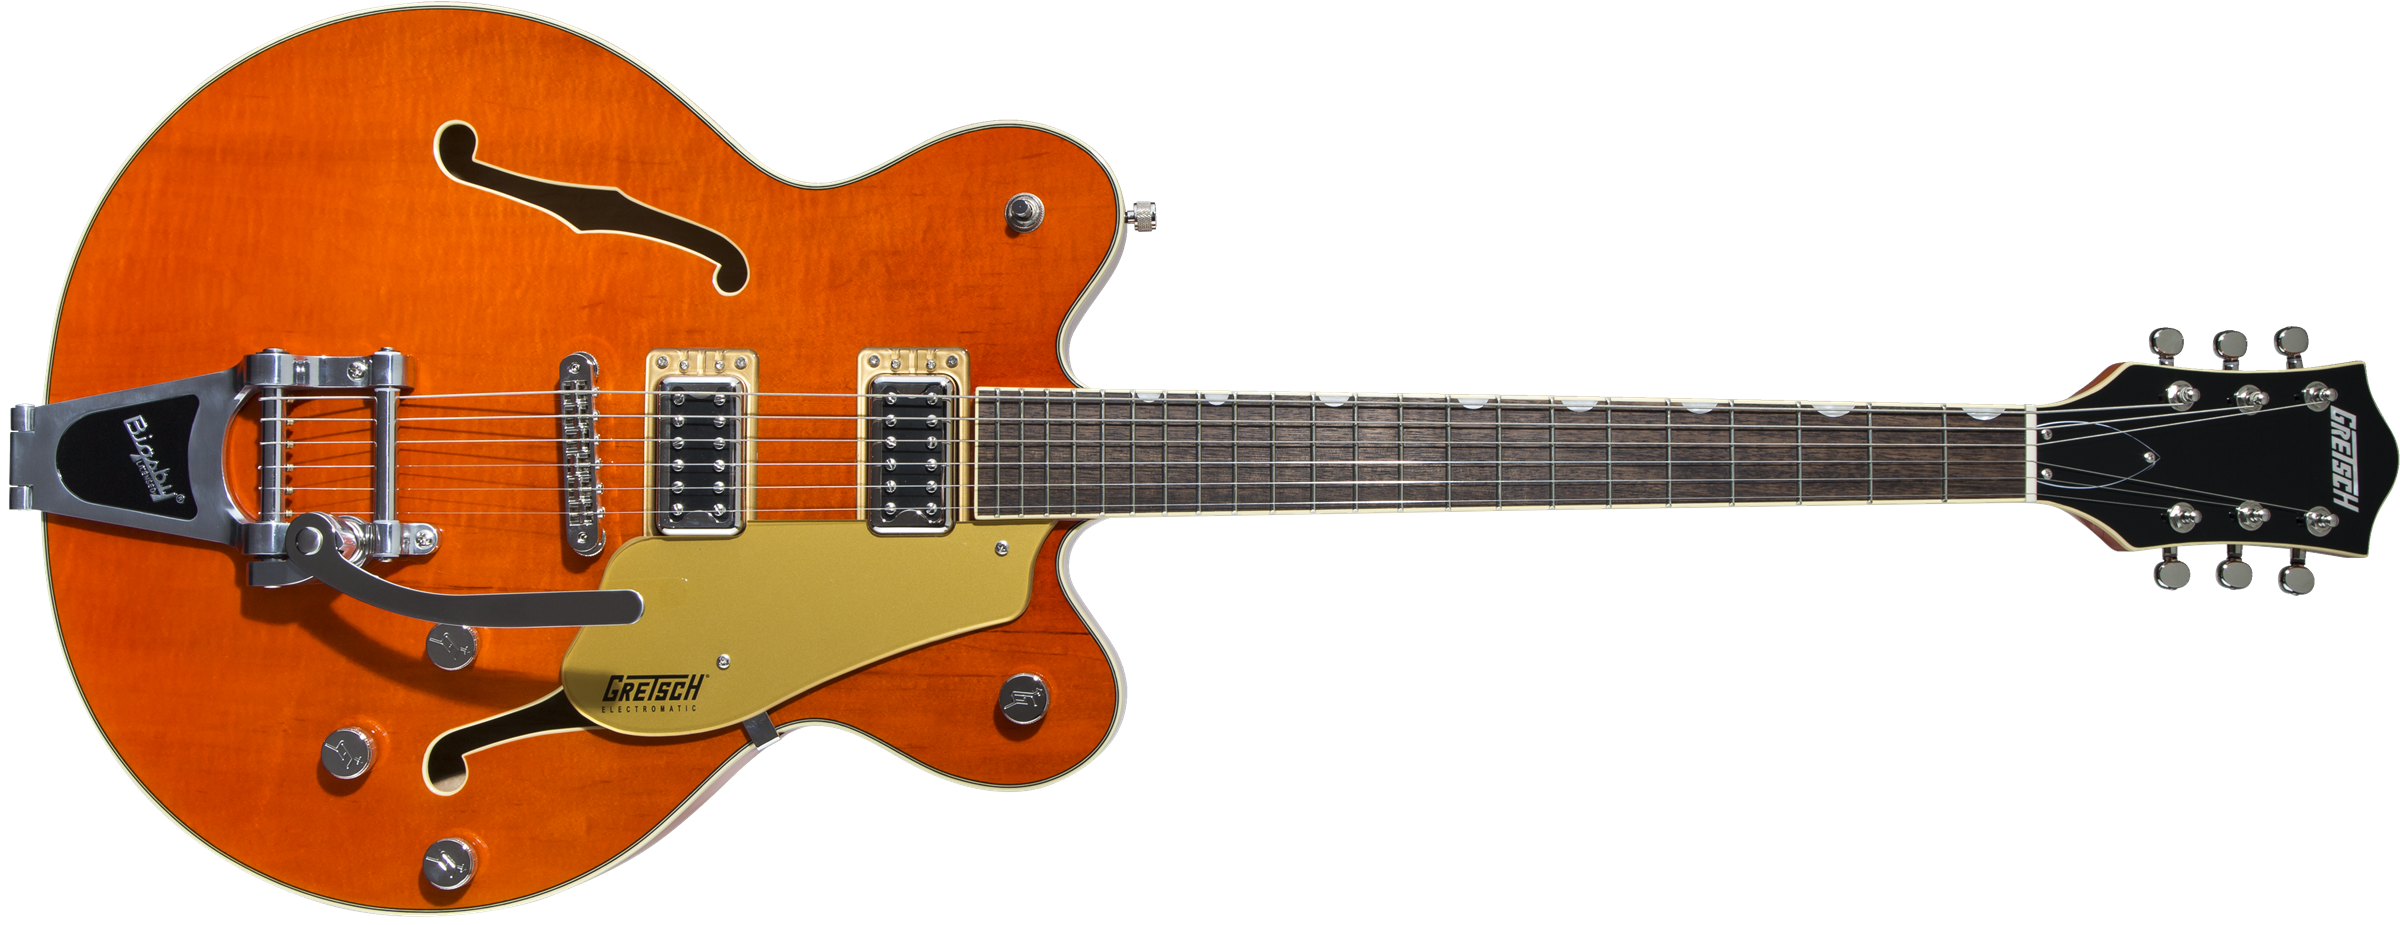 Gretsch G5622T Electromatic Center Block Double-Cut with Bigsby Orange Stain MODEL 2508200512